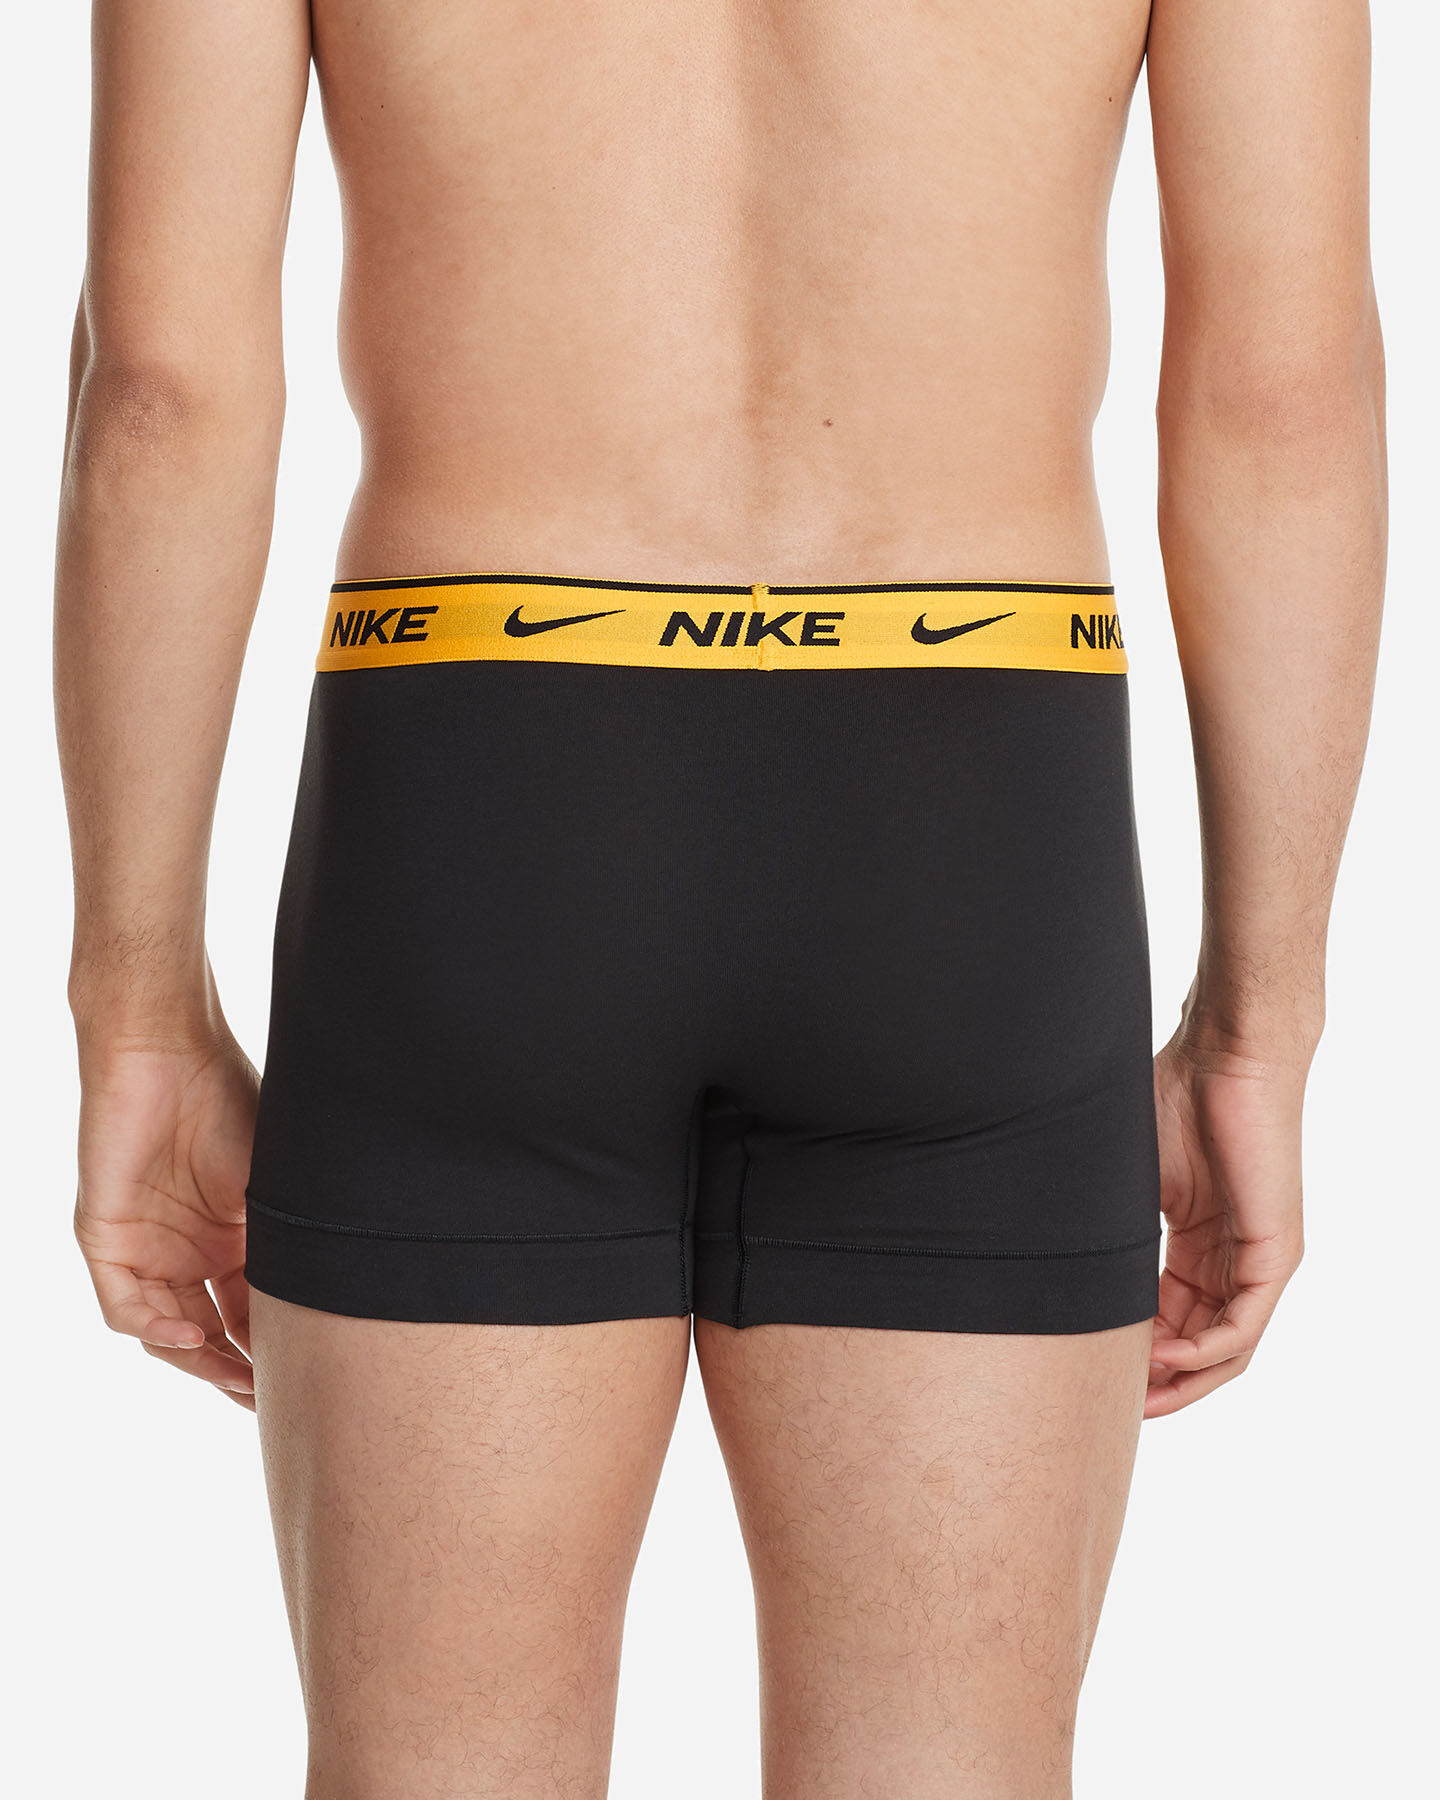  Intimo NIKE 3PACK BOXER EVERYDAY M S4099884|M1R|M scatto 3